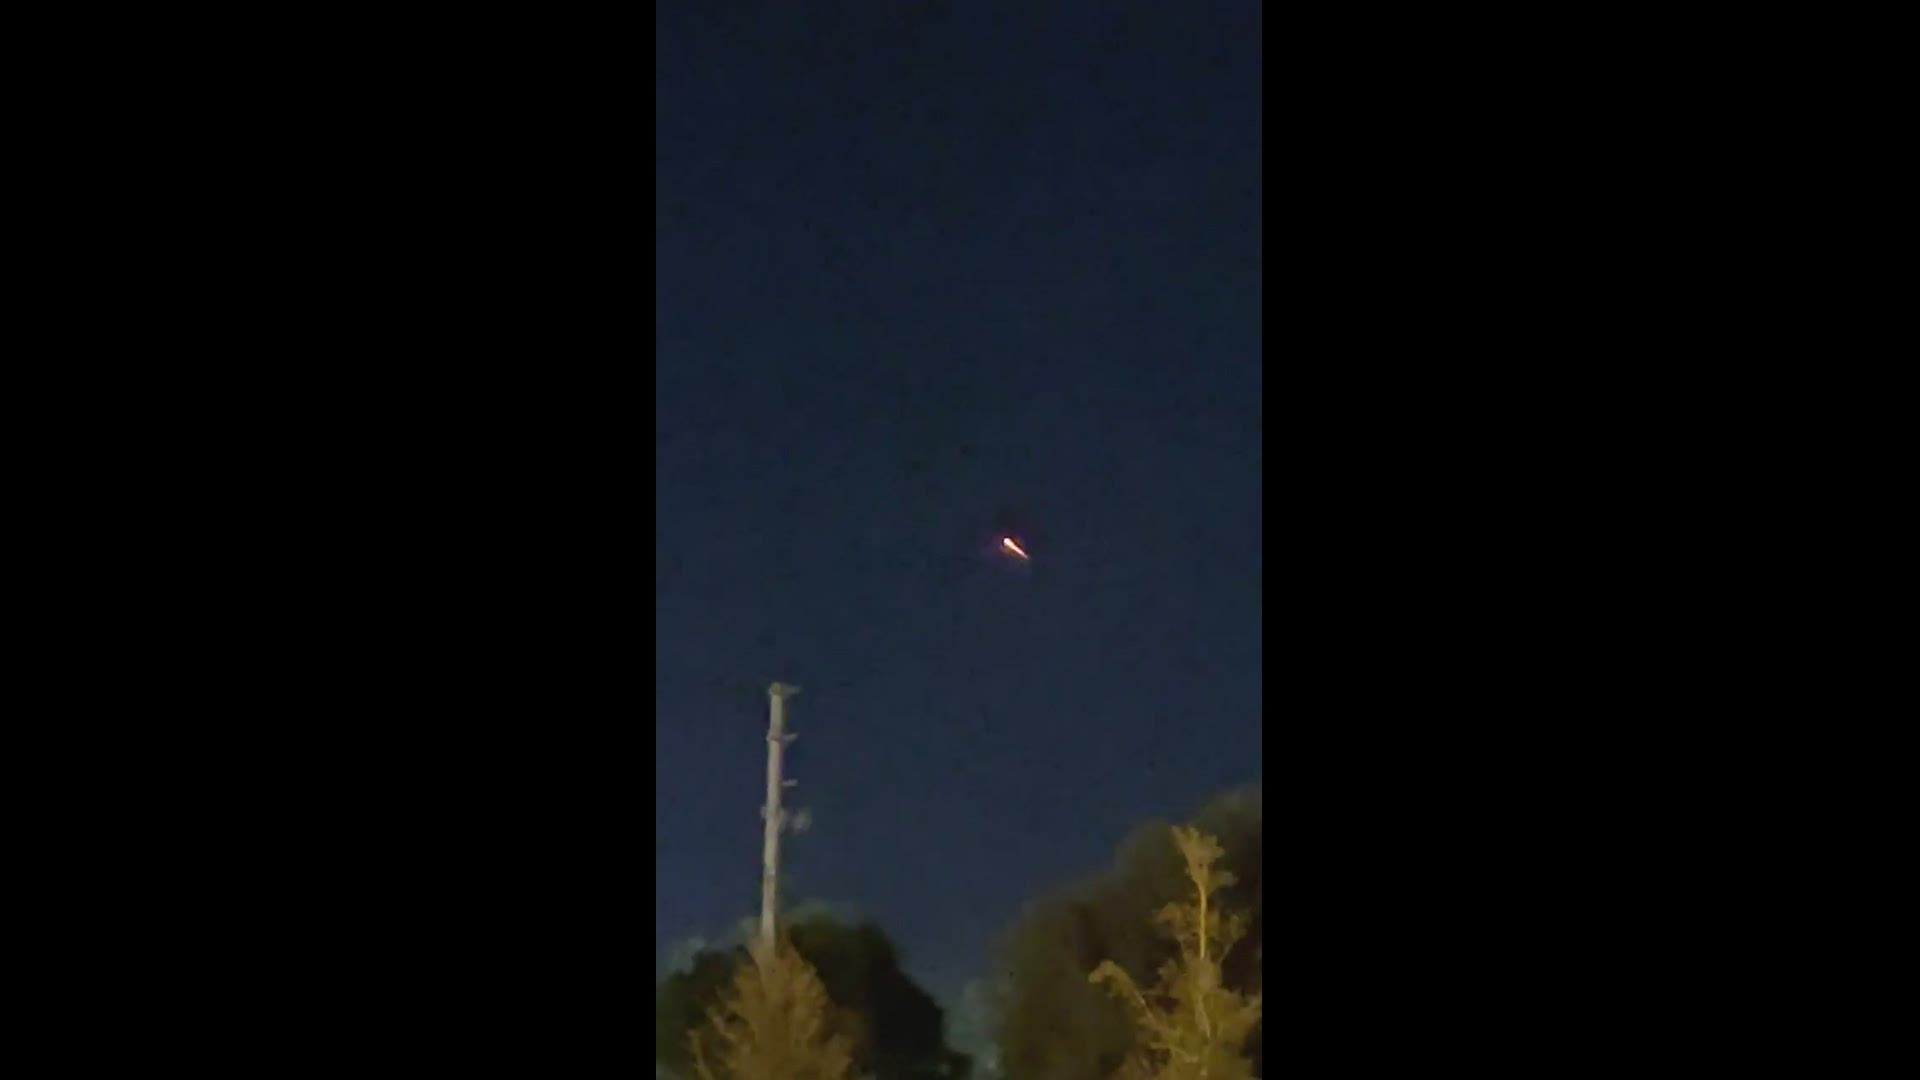 Watch Possible meteor captured on video in North Florida